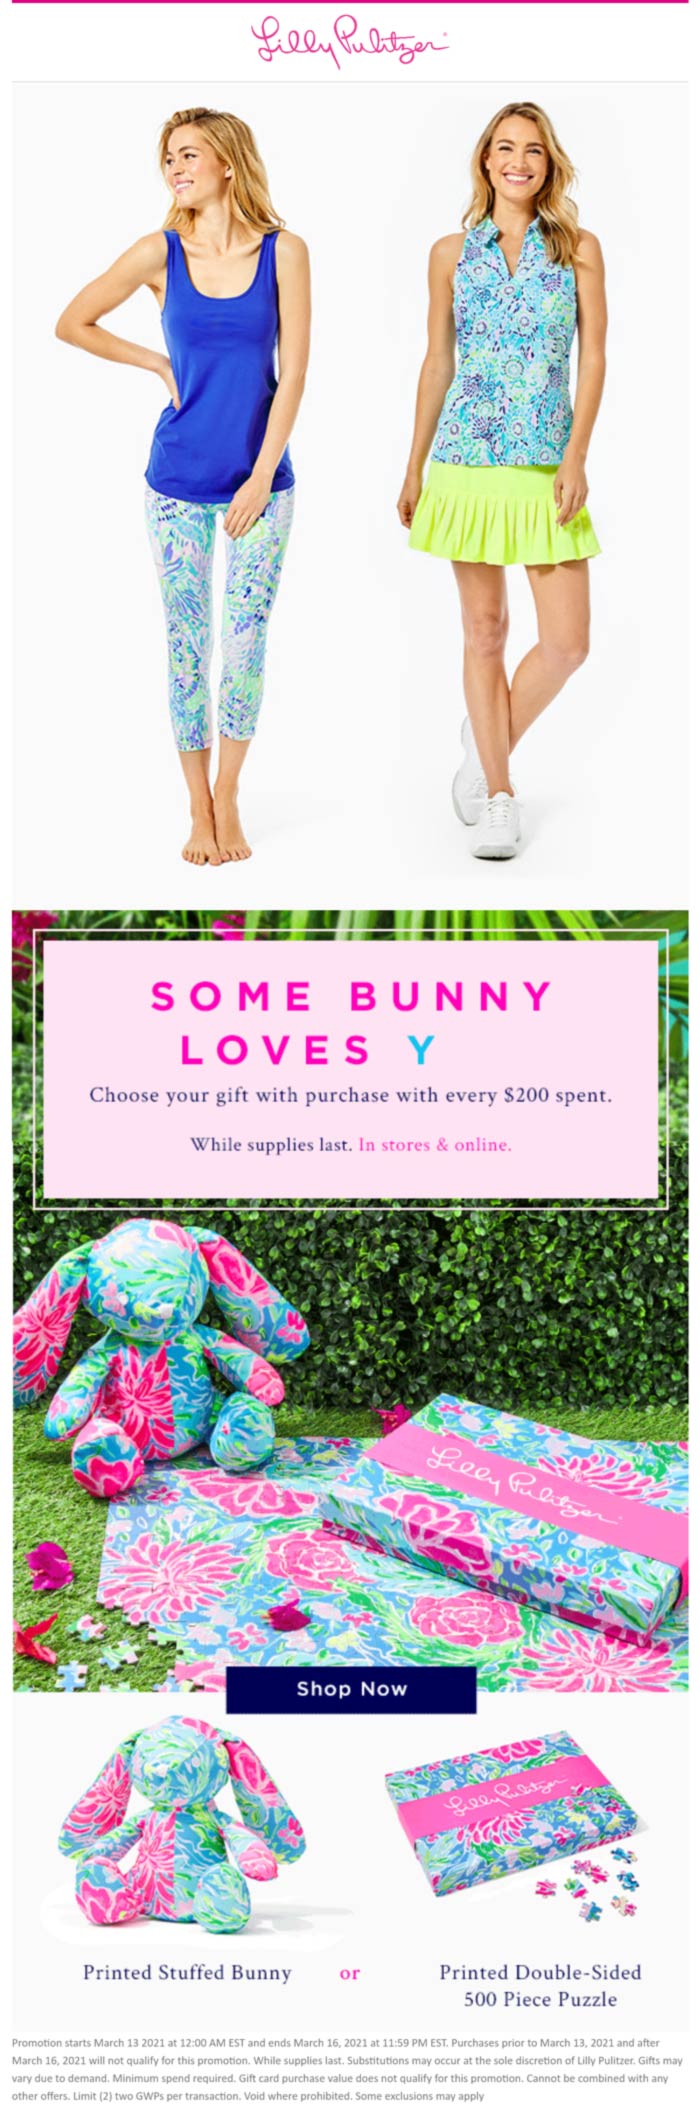 Lilly Pulitzer stores Coupon  Free gift with every $200 spent at Lilly Pulitzer, ditto online #lillypulitzer 